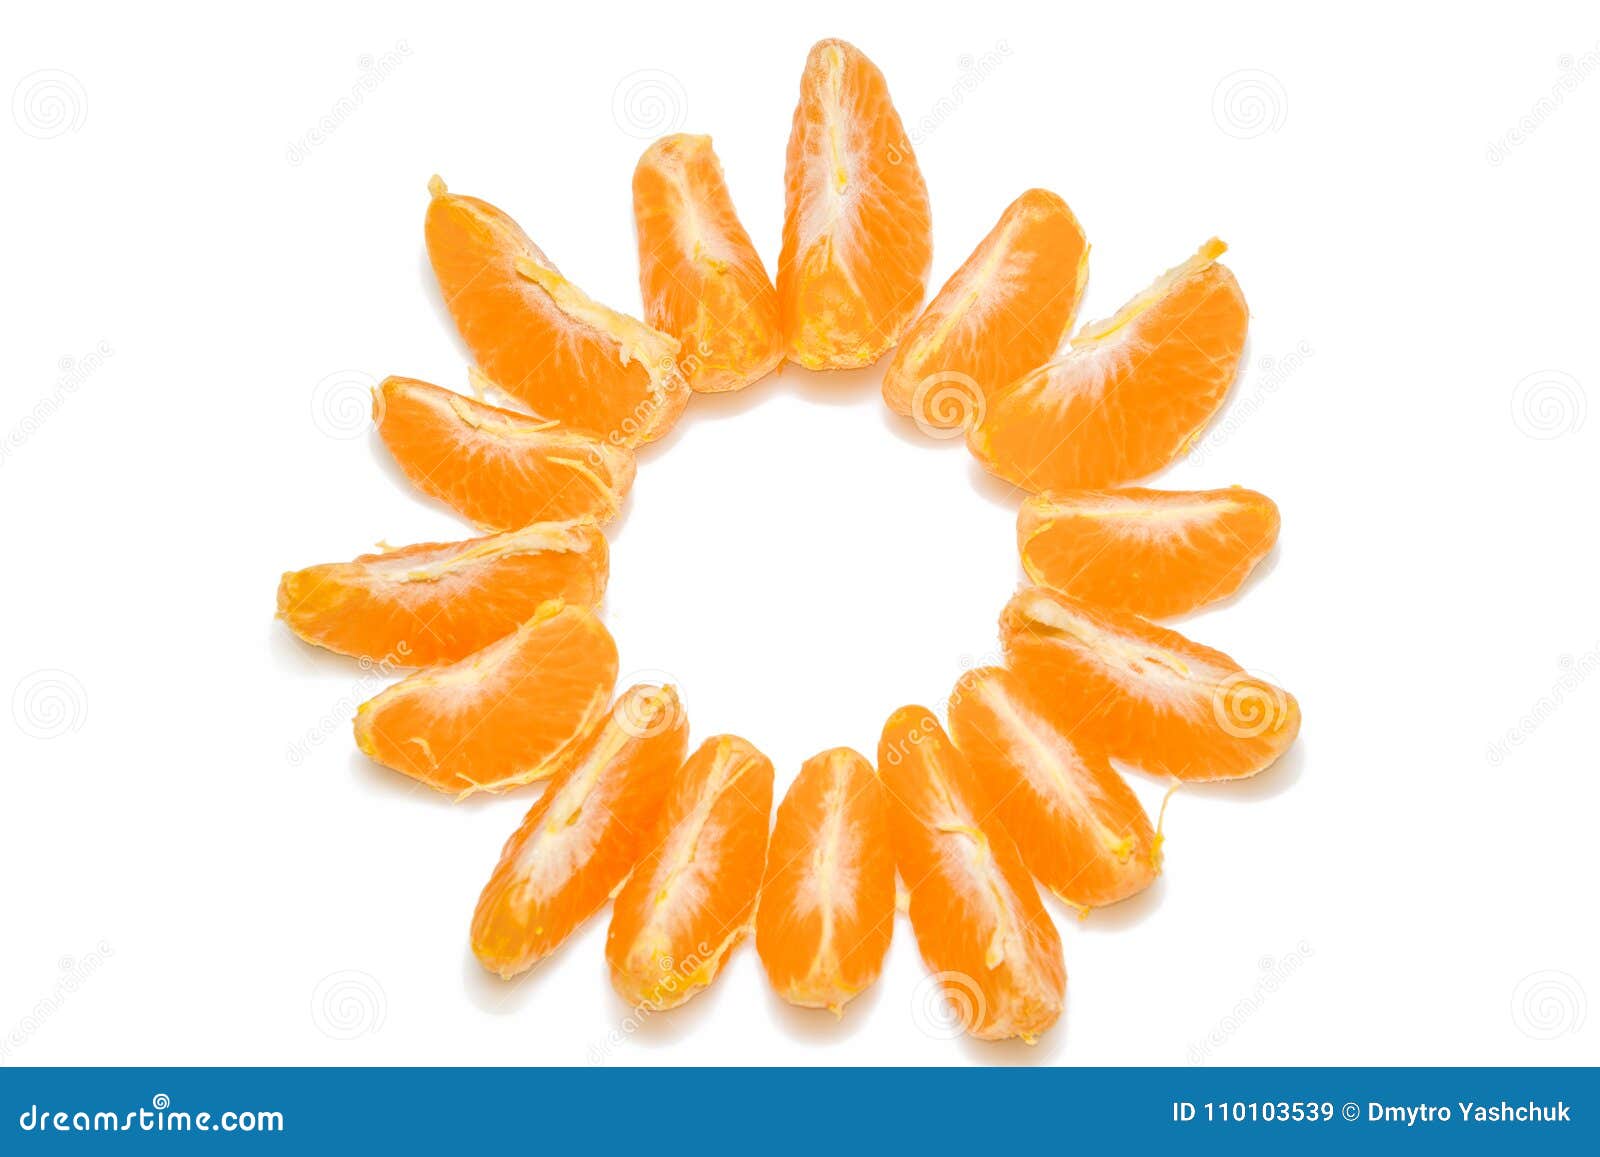 Isolated Citrus Segments Collection Of Tangerine Orange And Other